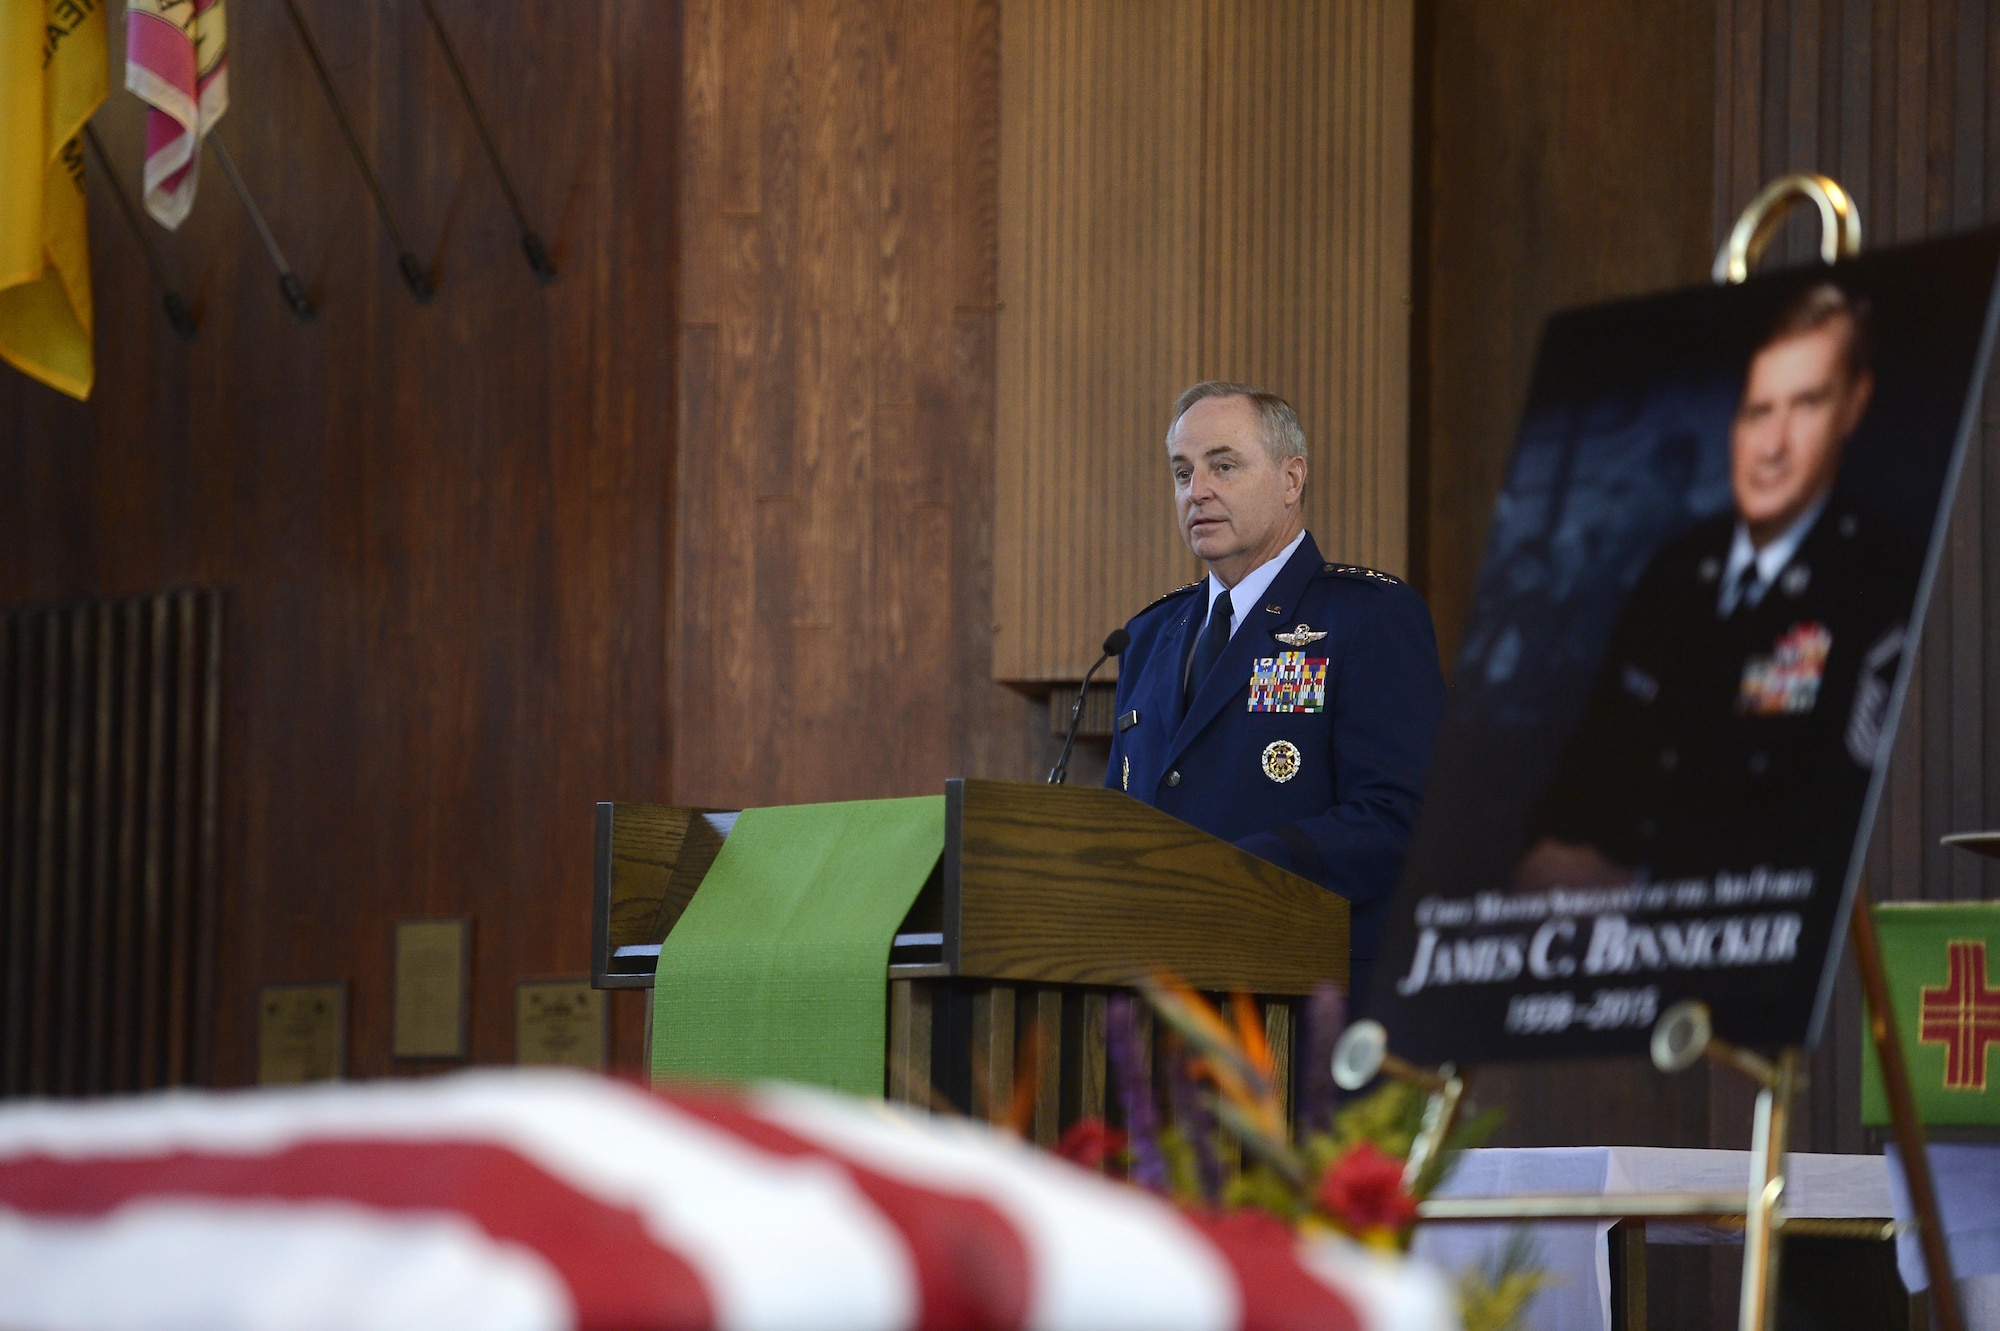 Air Force Chief of Staff Gen. Mark A. Welsh III speaks during the memorial service in honor of ninth Chief Master Sgt. of the Air Force James C. Binnicker, before he is laid to rest in Arlington National Cemetery, Va., Aug. 14, 2015. Binnicker passed away March 21 in Calhoun, Ga. (U.S. Air Force photo/Scott M. Ash)